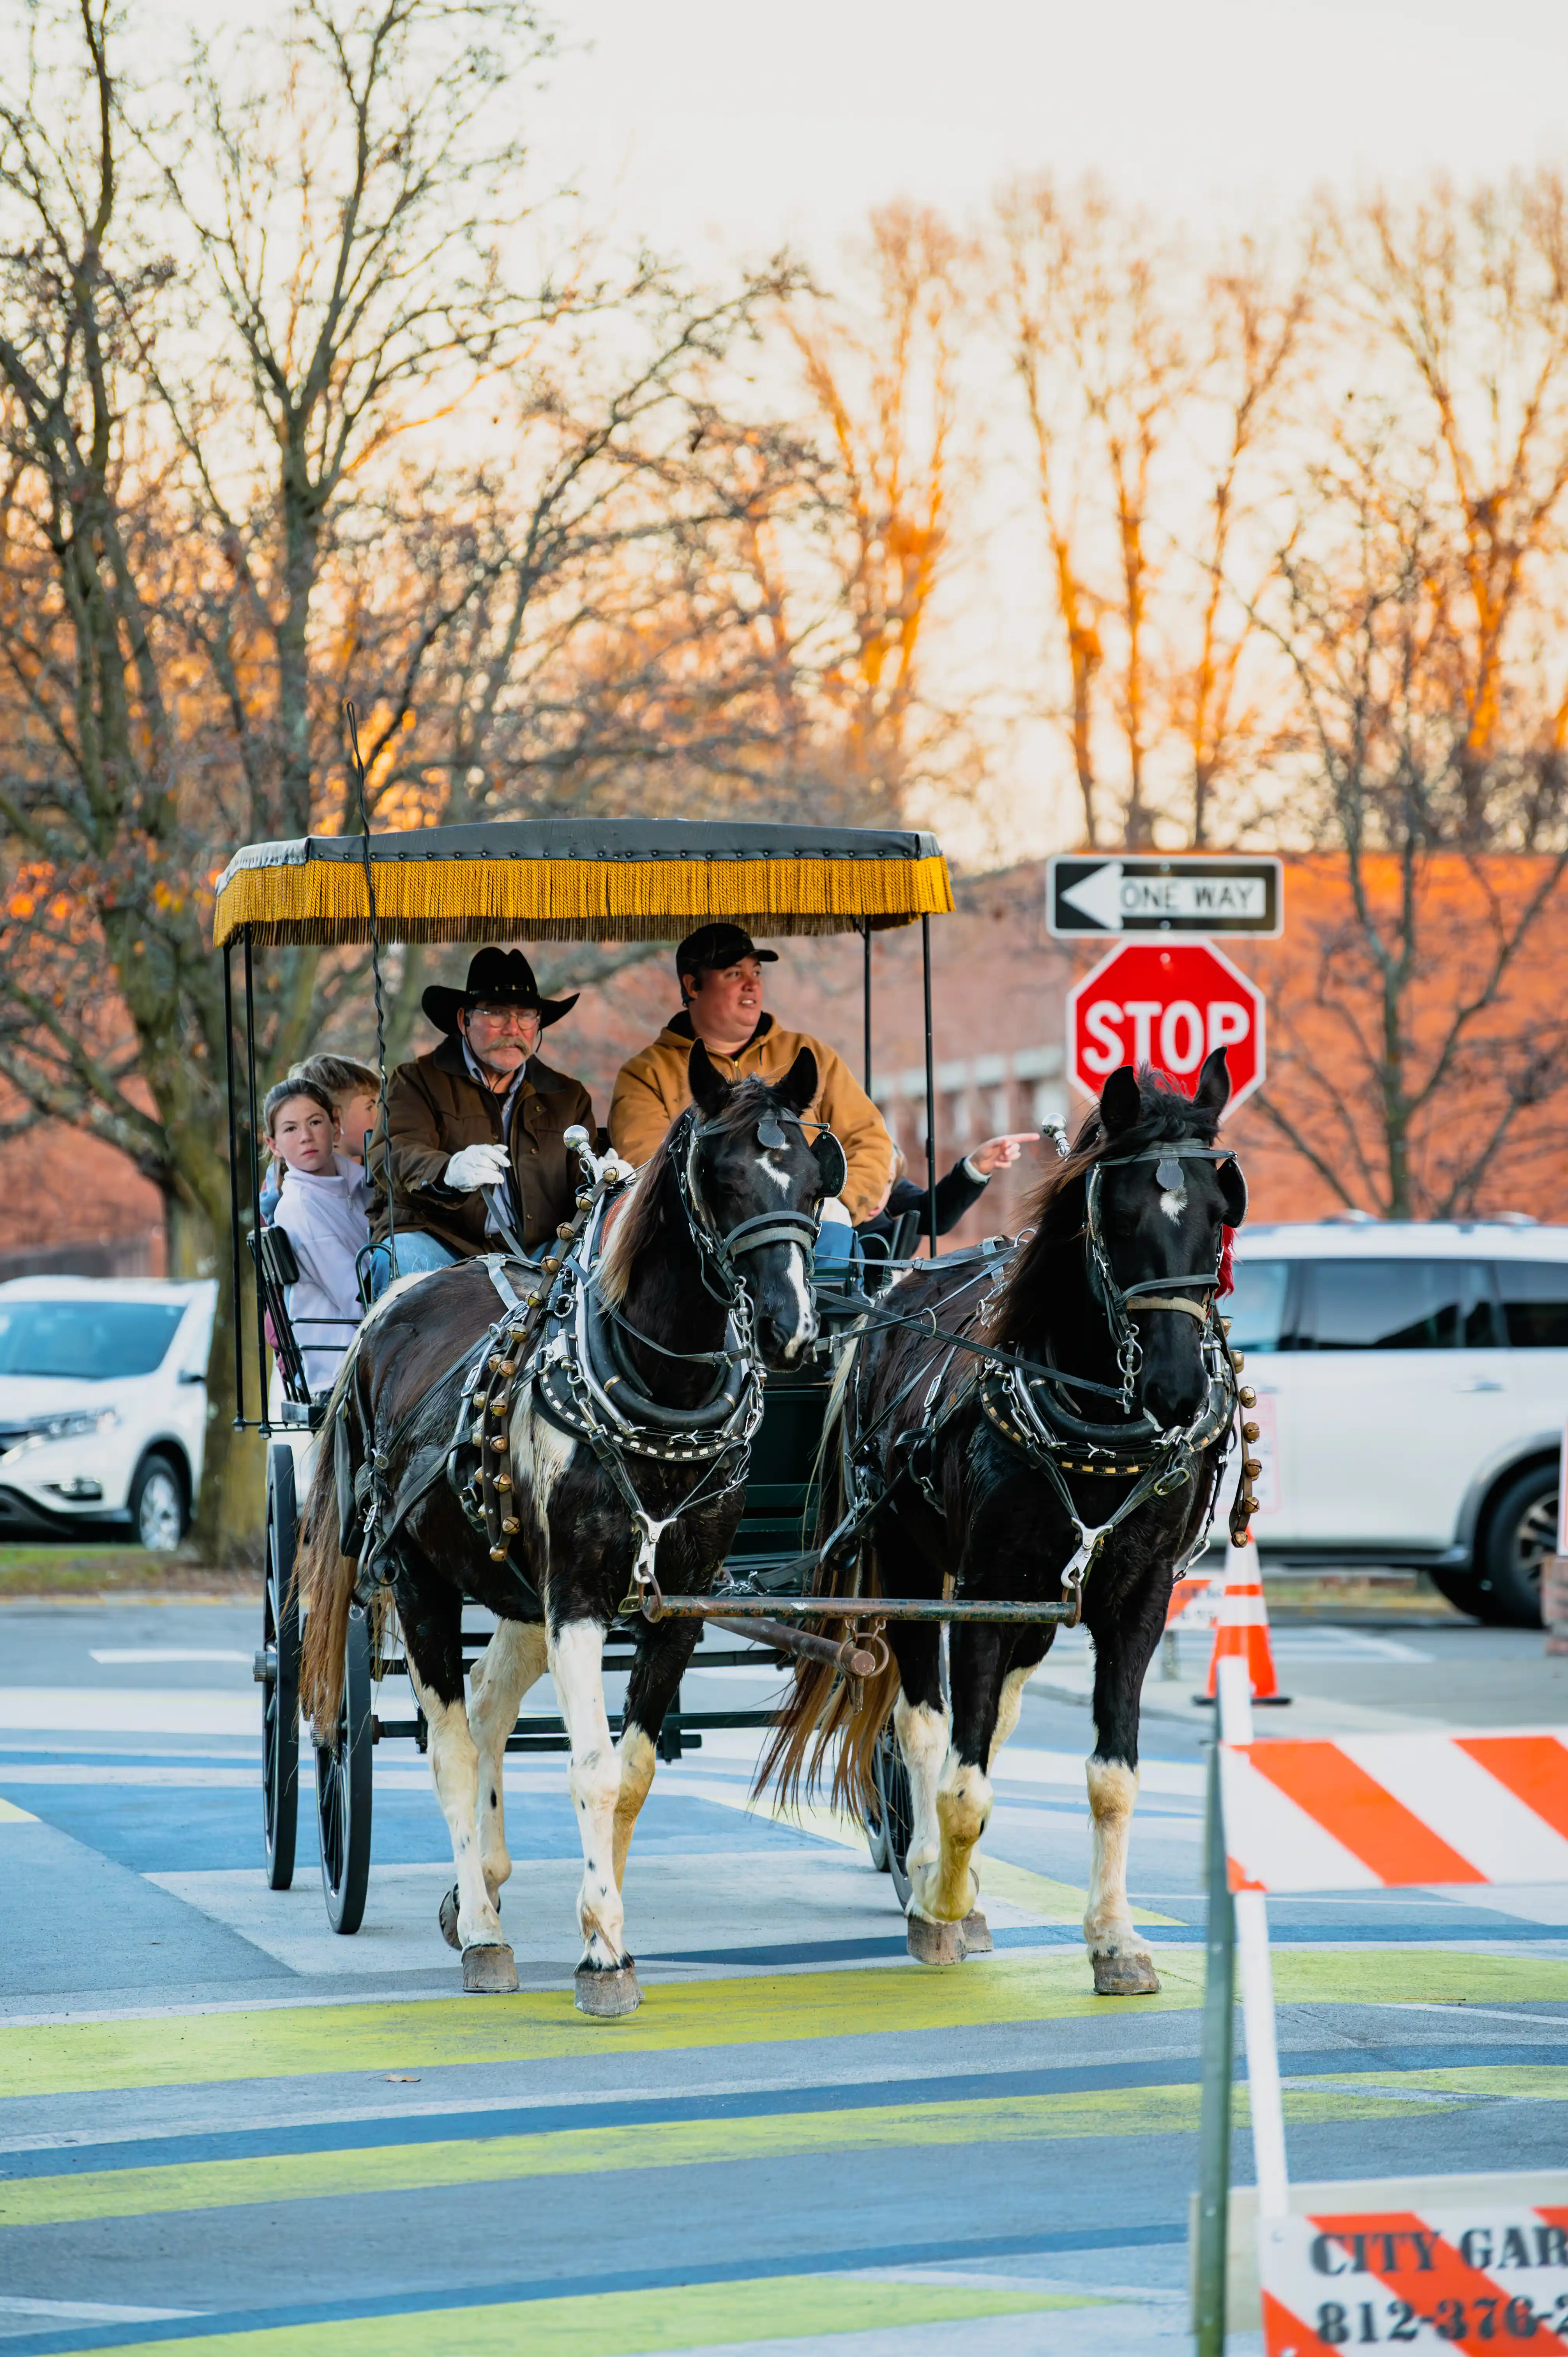 Horse-drawn carriage with passengers on a city street at dusk, crossing an intersection with a stop sign visible.